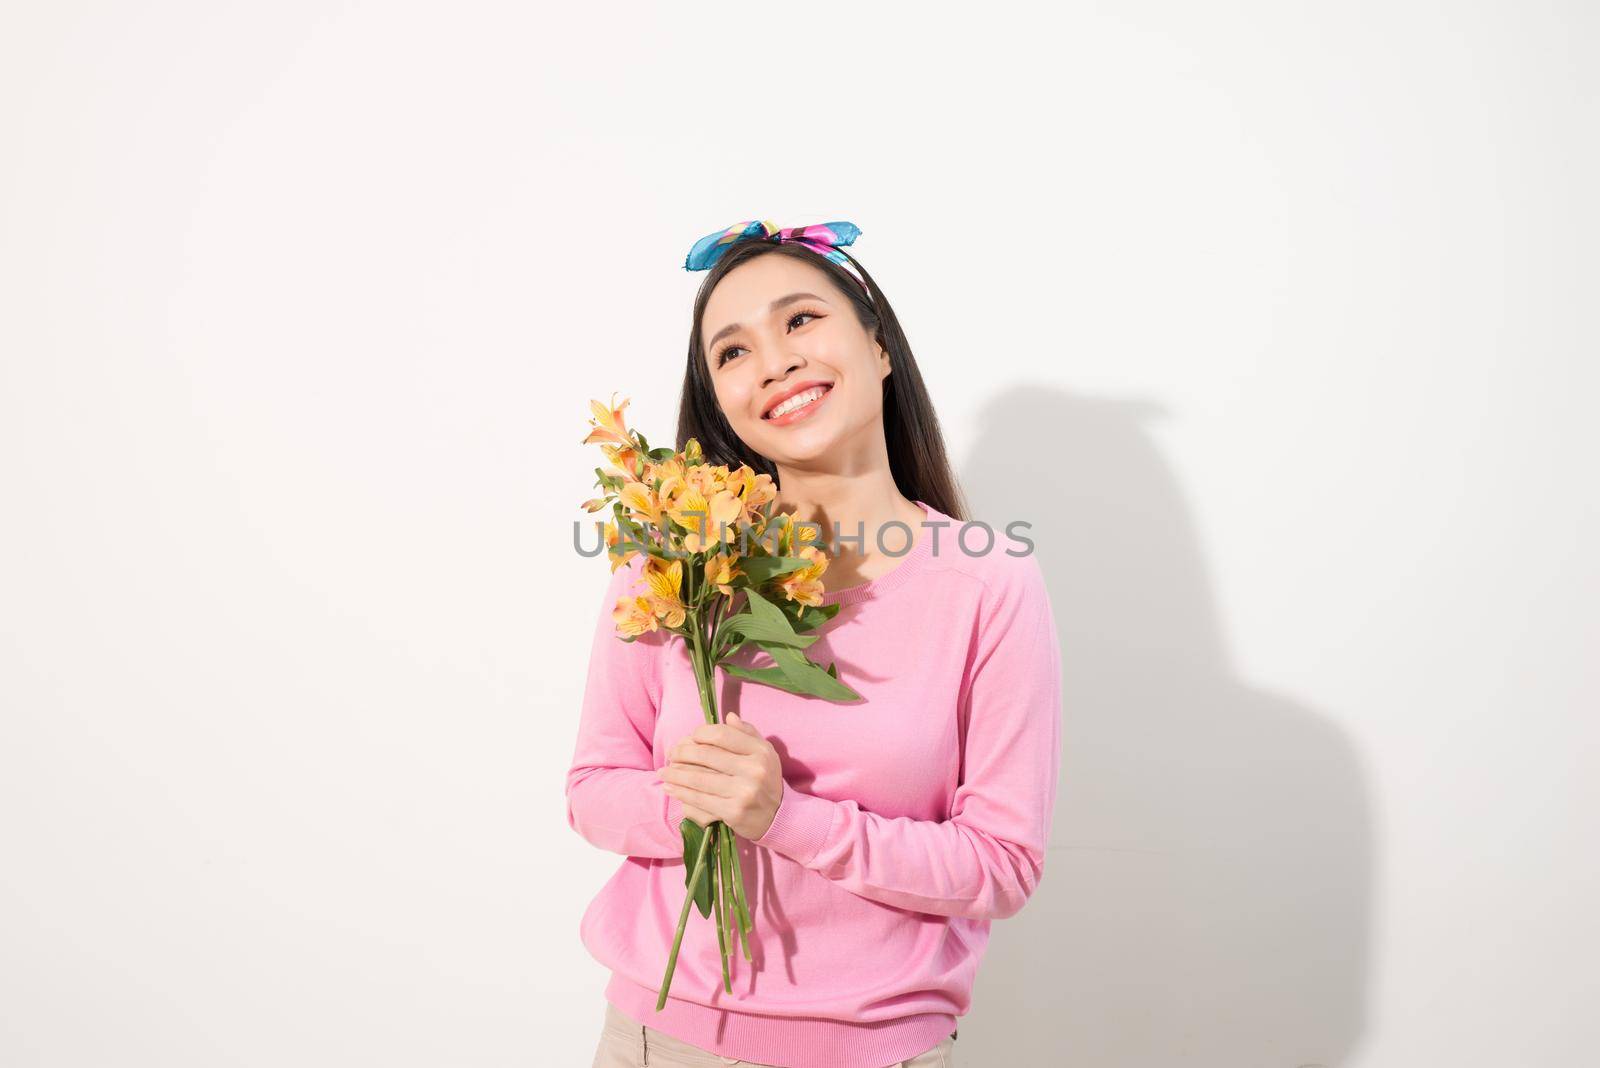 Beautiful girl in the pink dress with flowers in hands on a white background